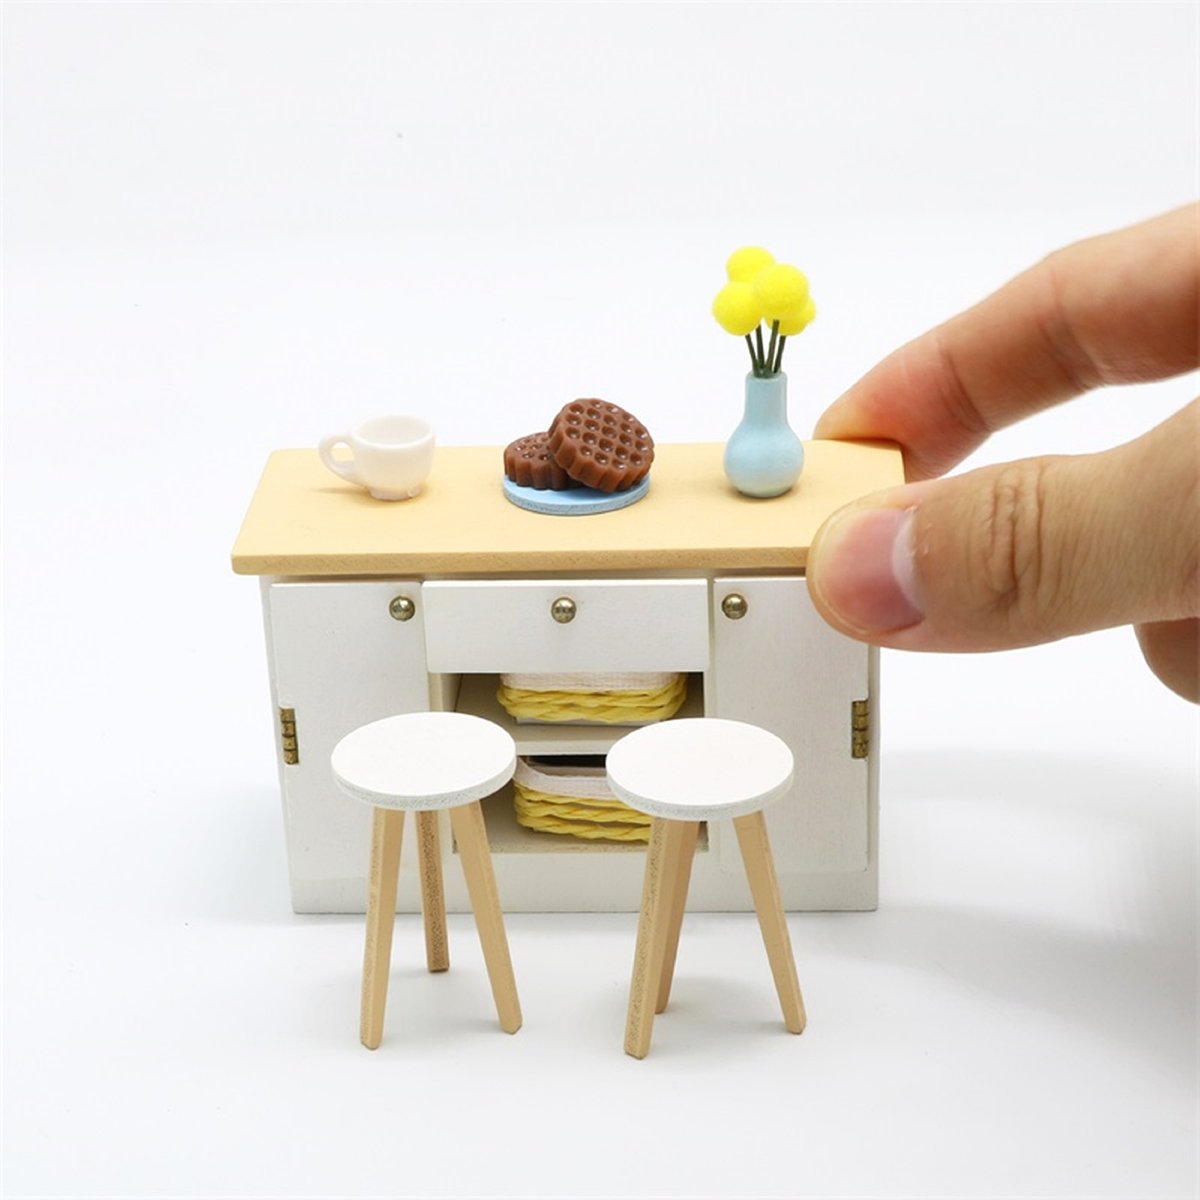 Miniature countertop and stools being placed by a comparatively large hand.